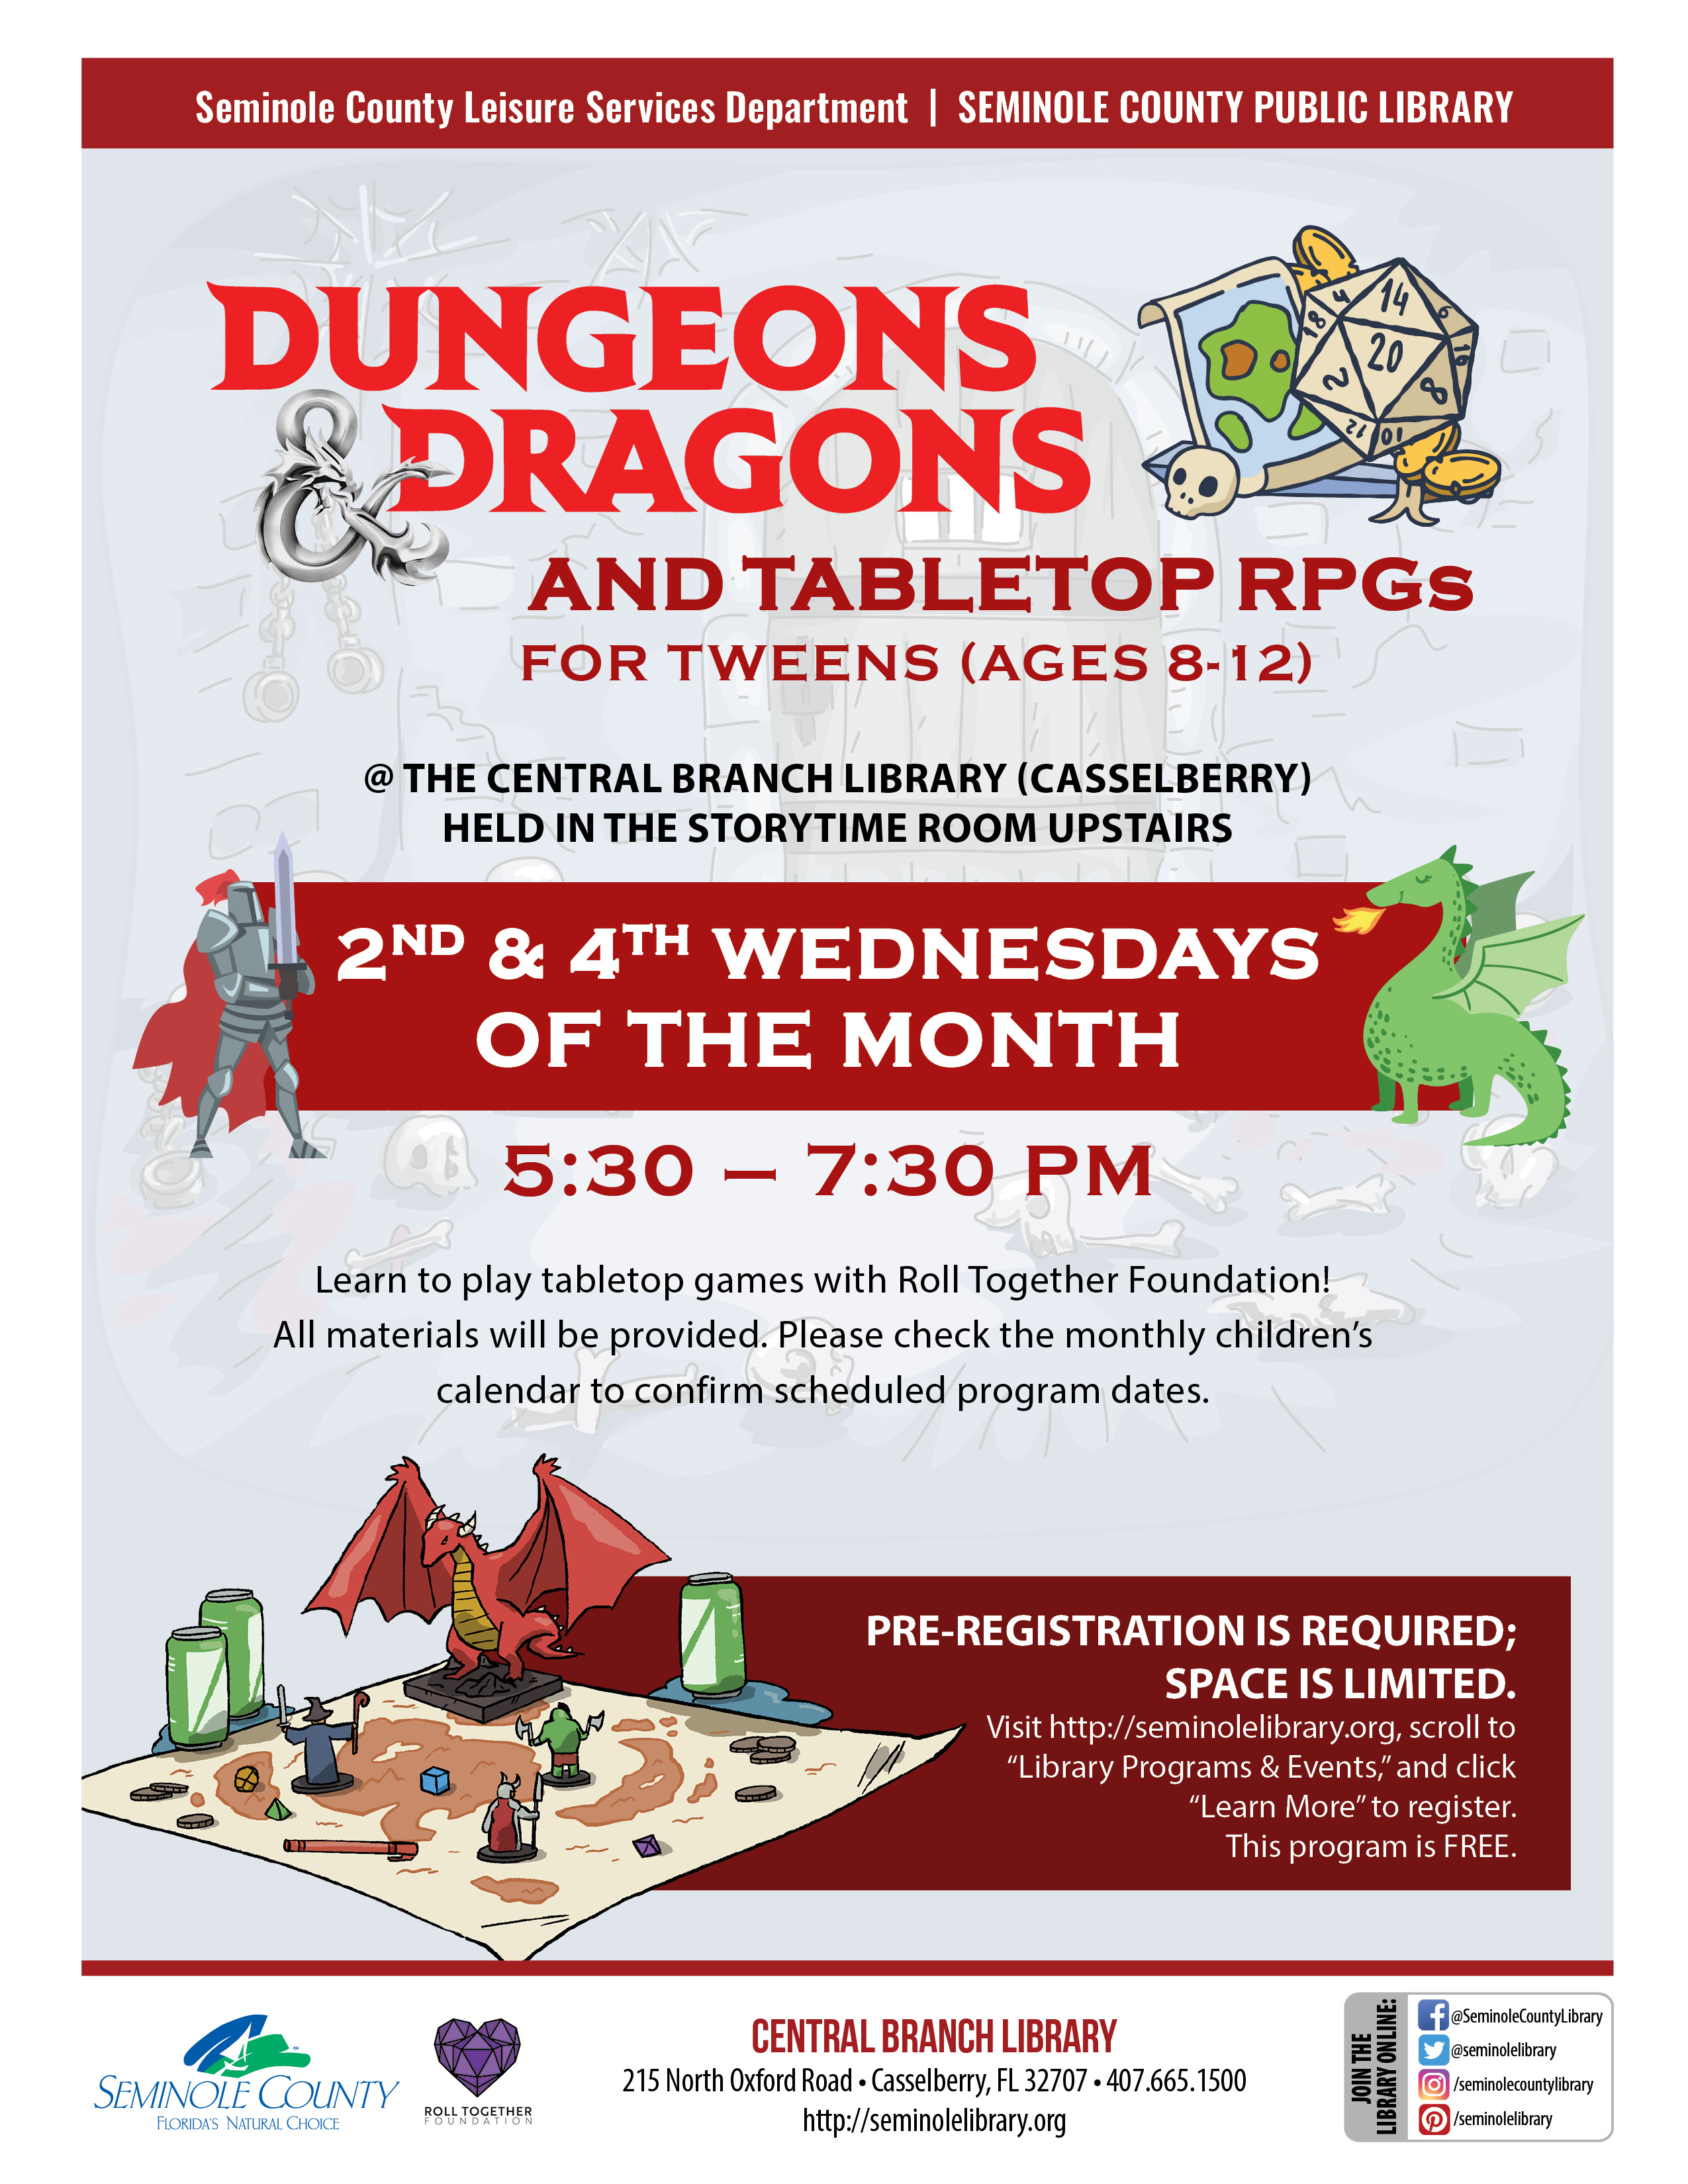 Dungeons & Dragons and RPGs for Tweens - Central Branch Library